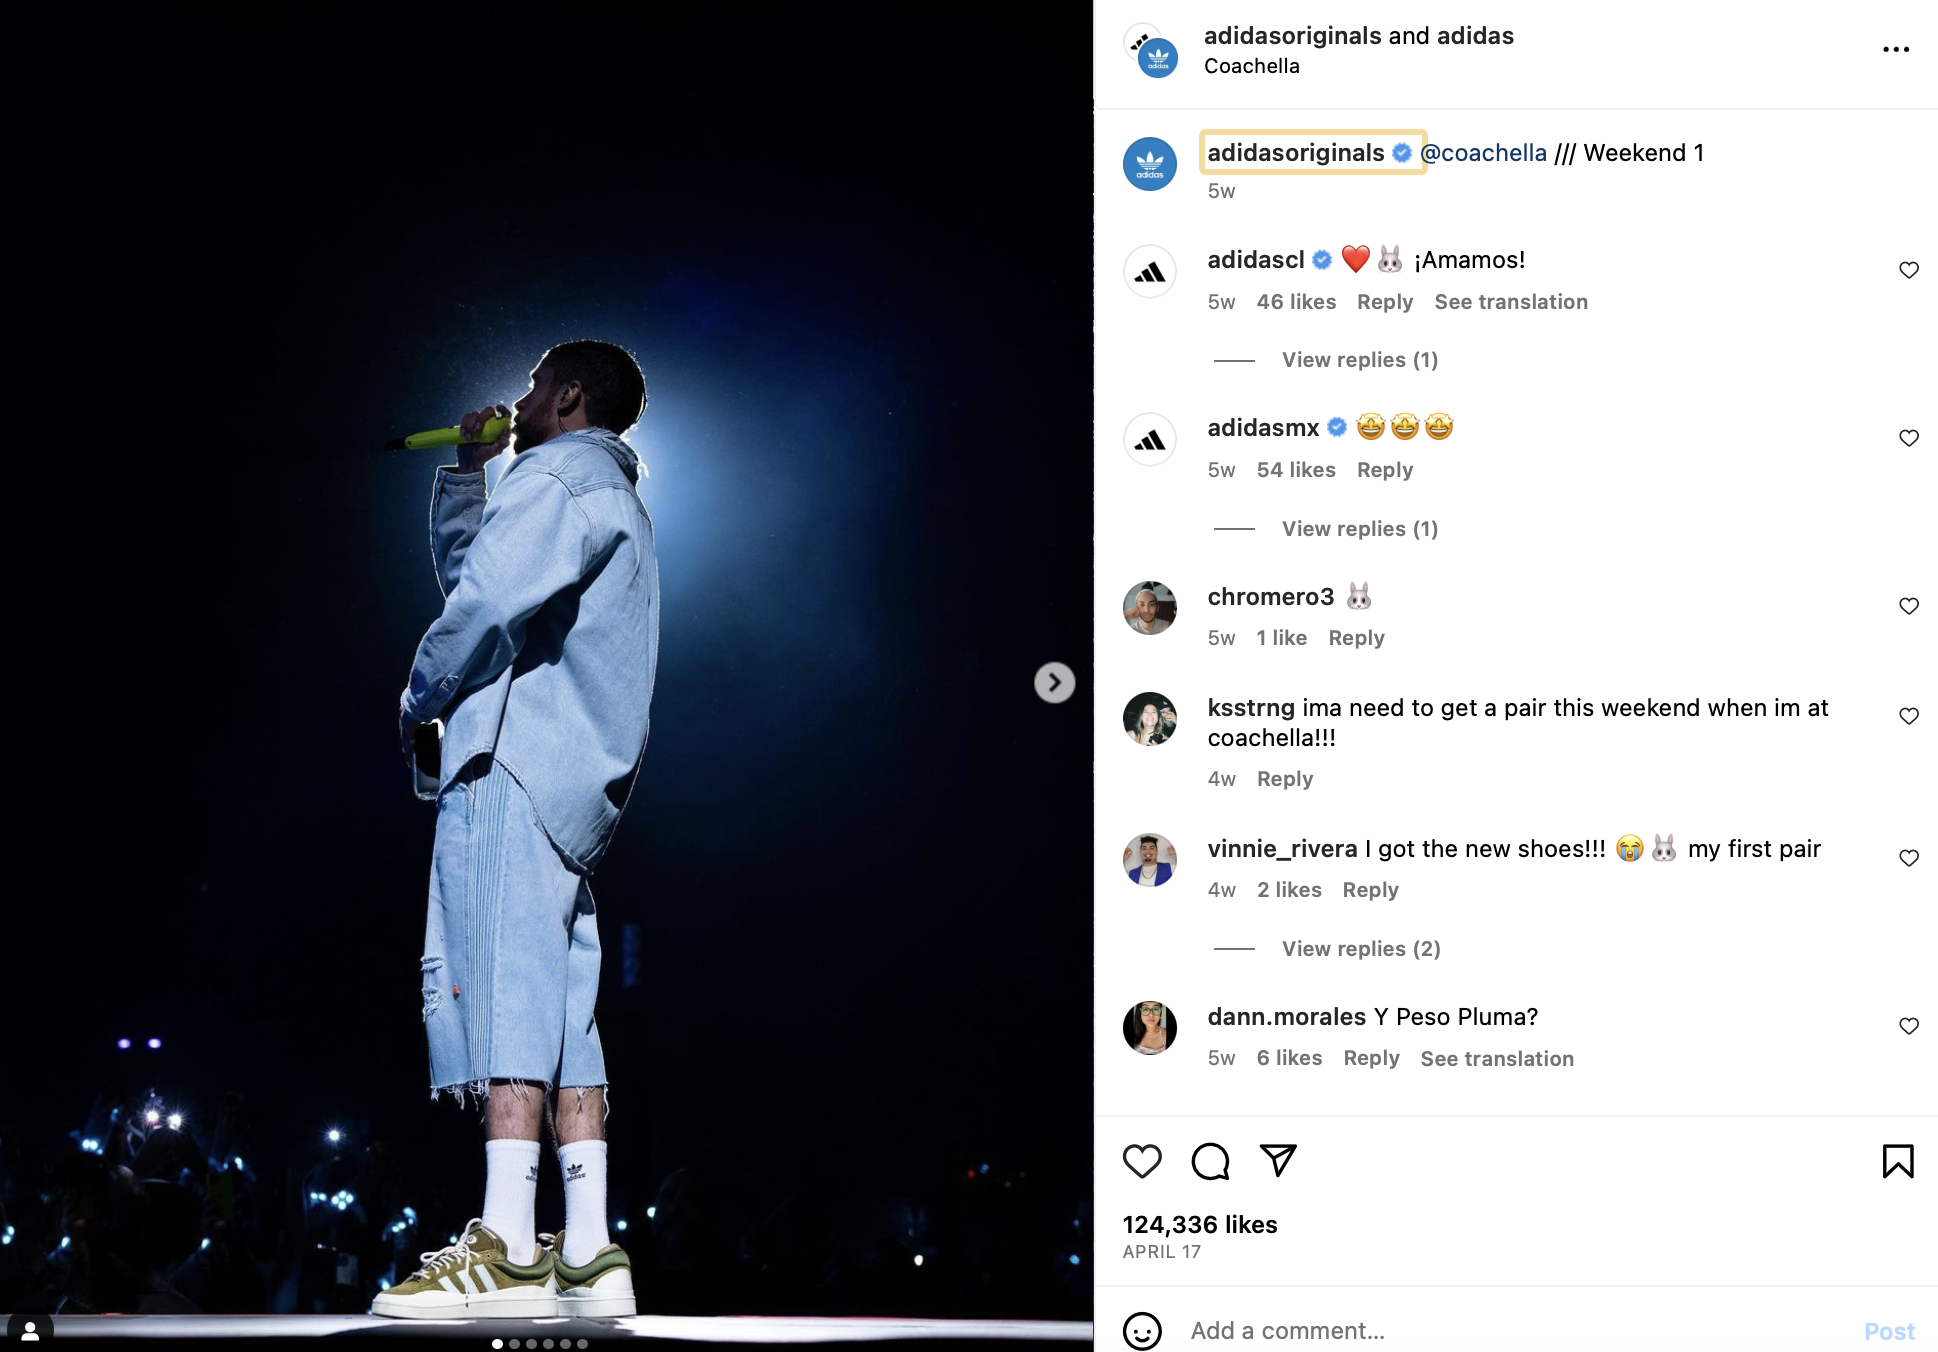 Instagram post from Adidas Originals showing an artist performing on stage and a geolocation tag for Coachella